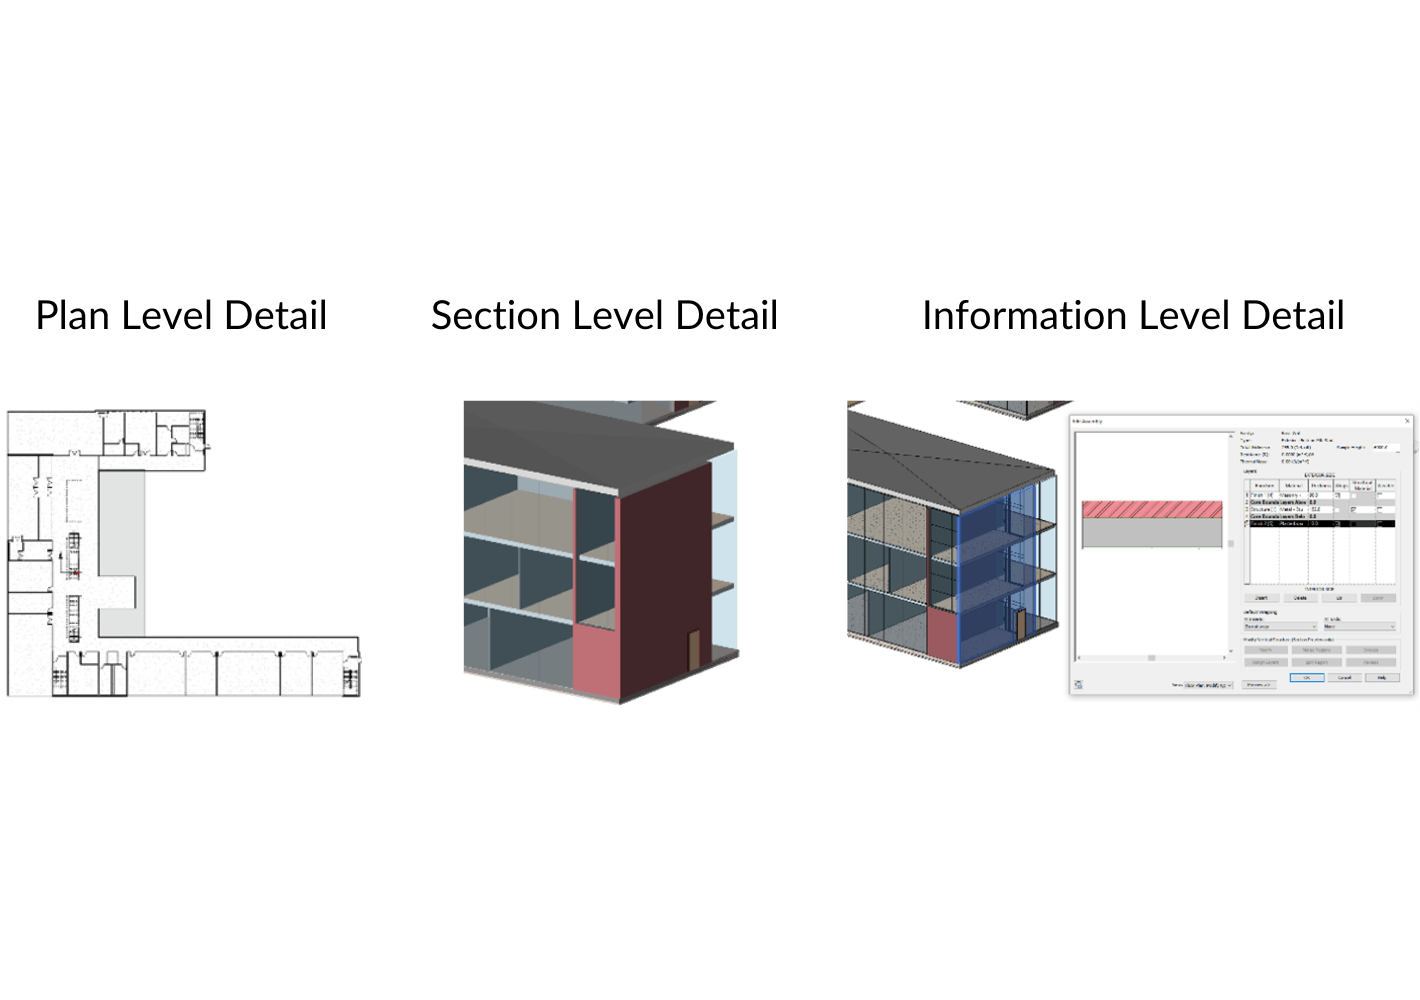 Table 2: Level of Detail (LOD) 200 shown in modeling practice